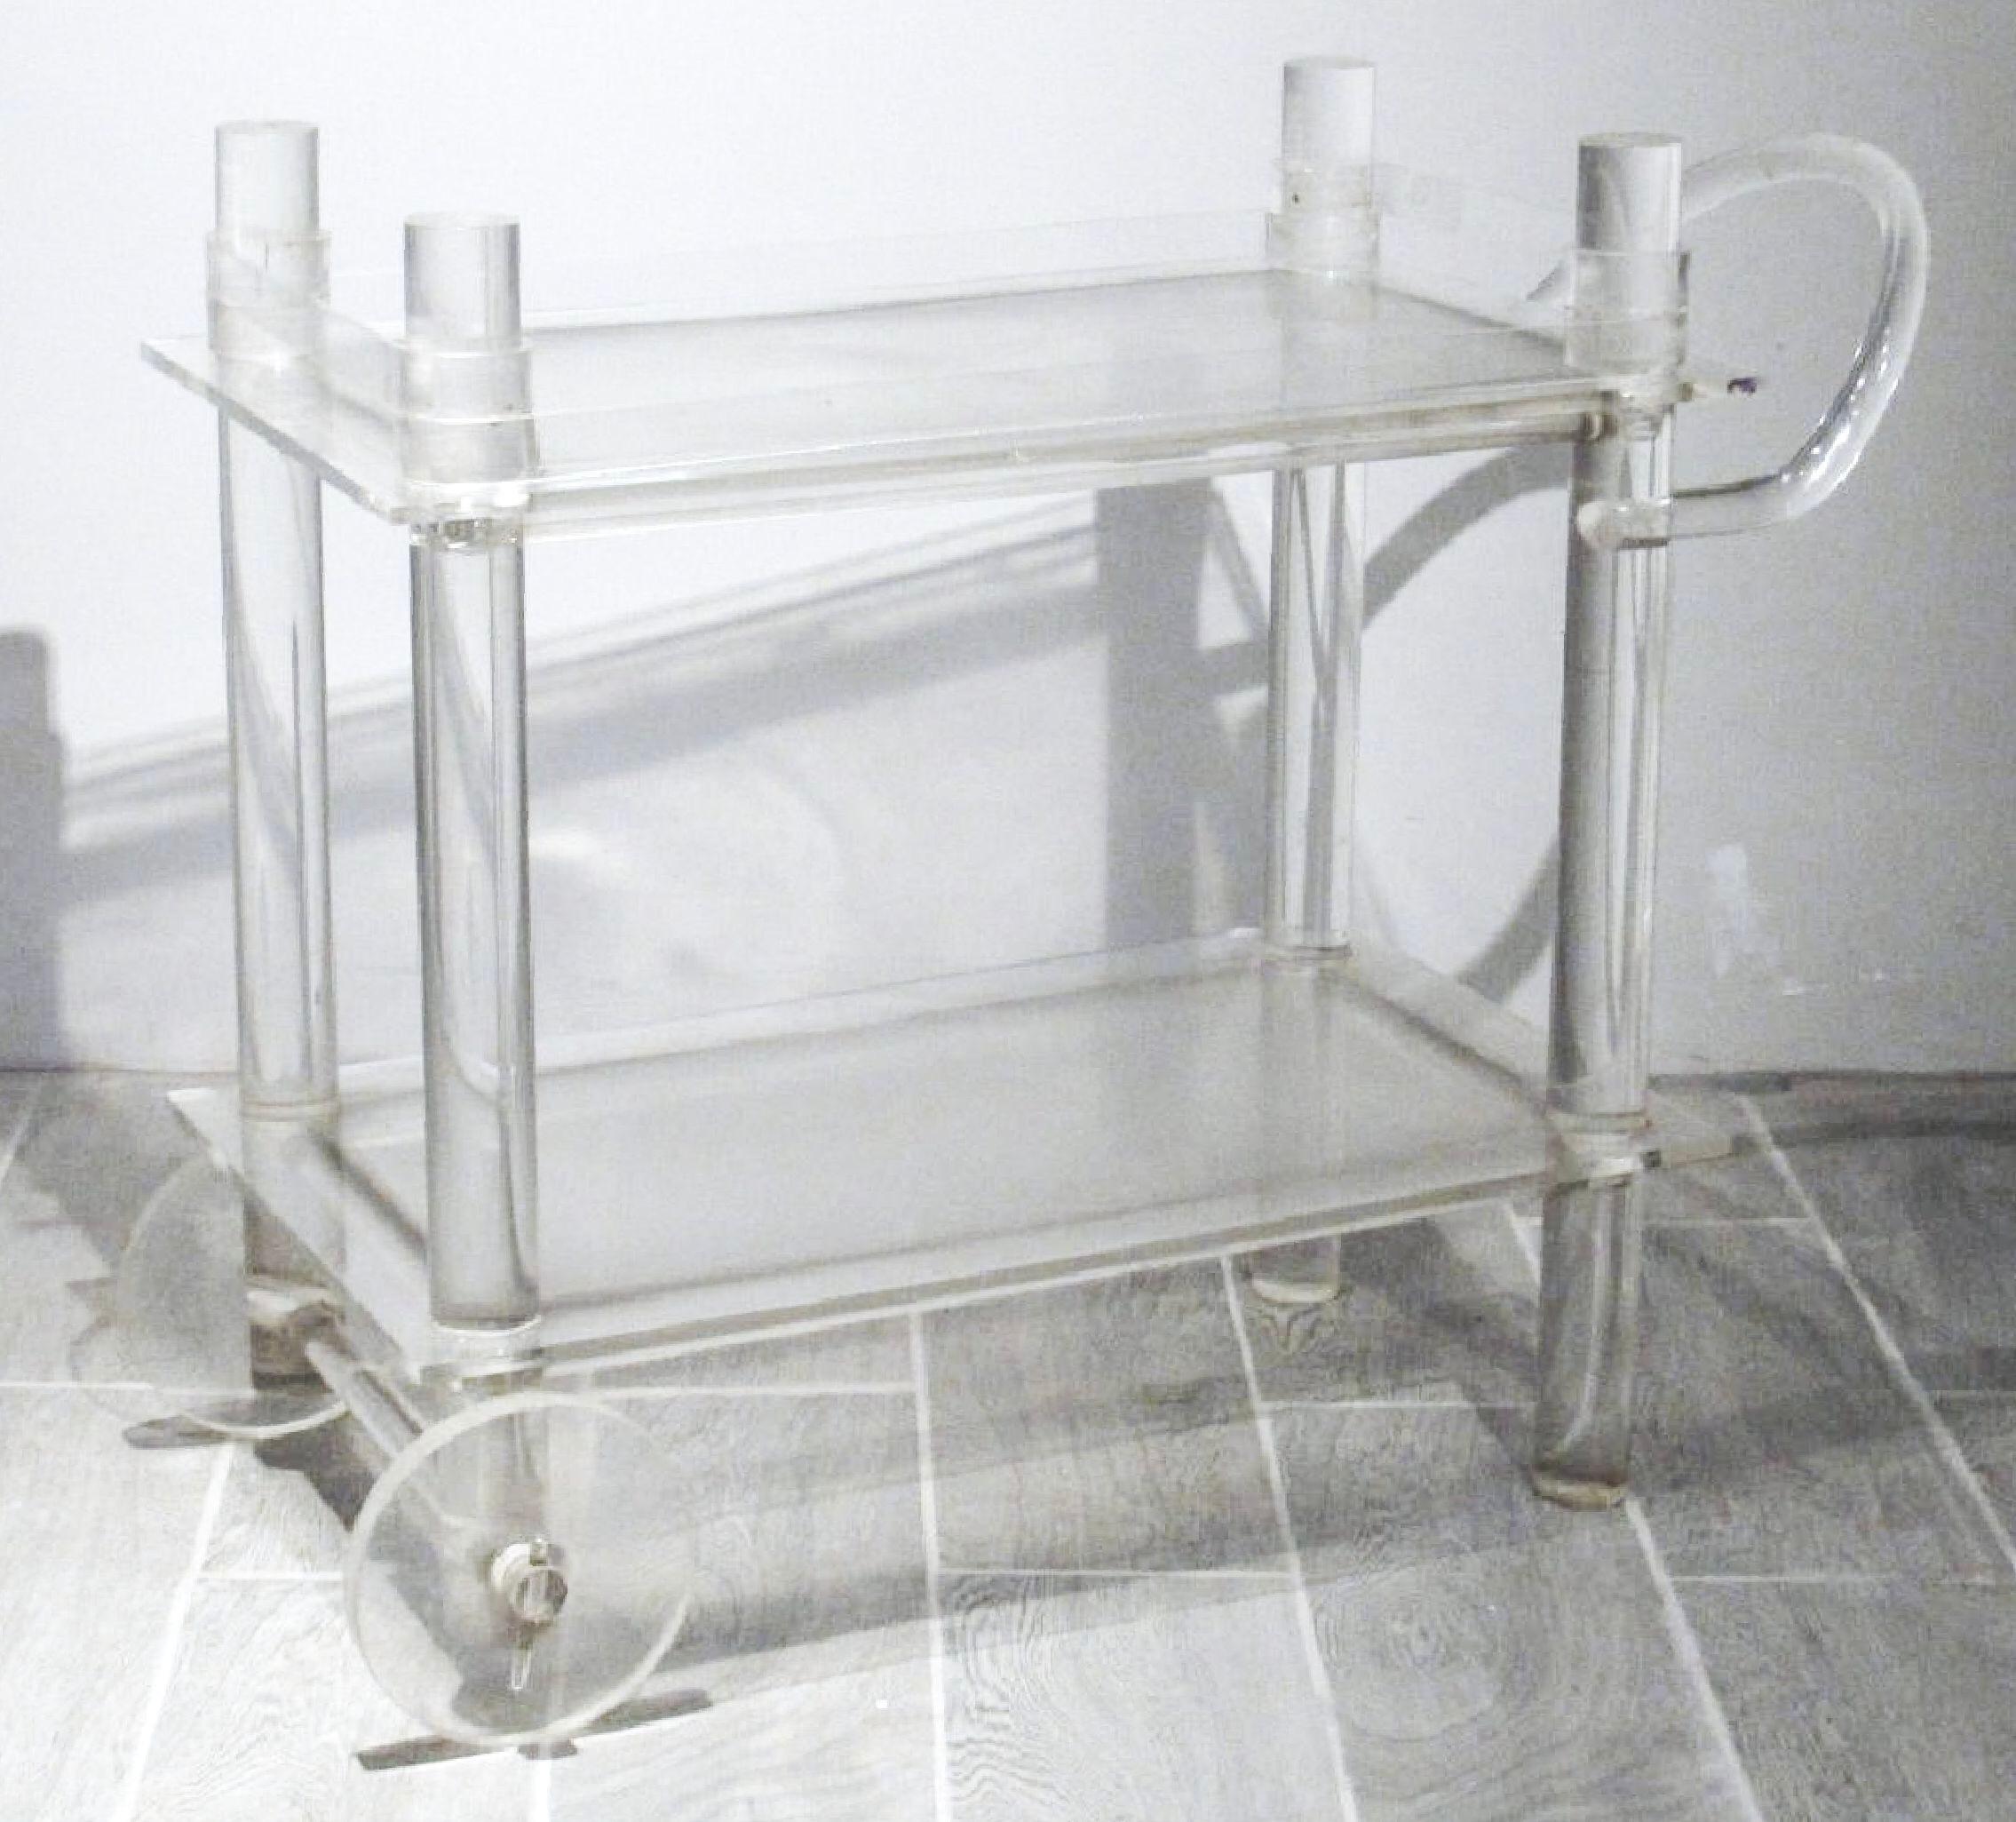 2 shelves (showing age) with top having removable gallery. Sculpted handle and tubular posts, wheels working. Measures: 37